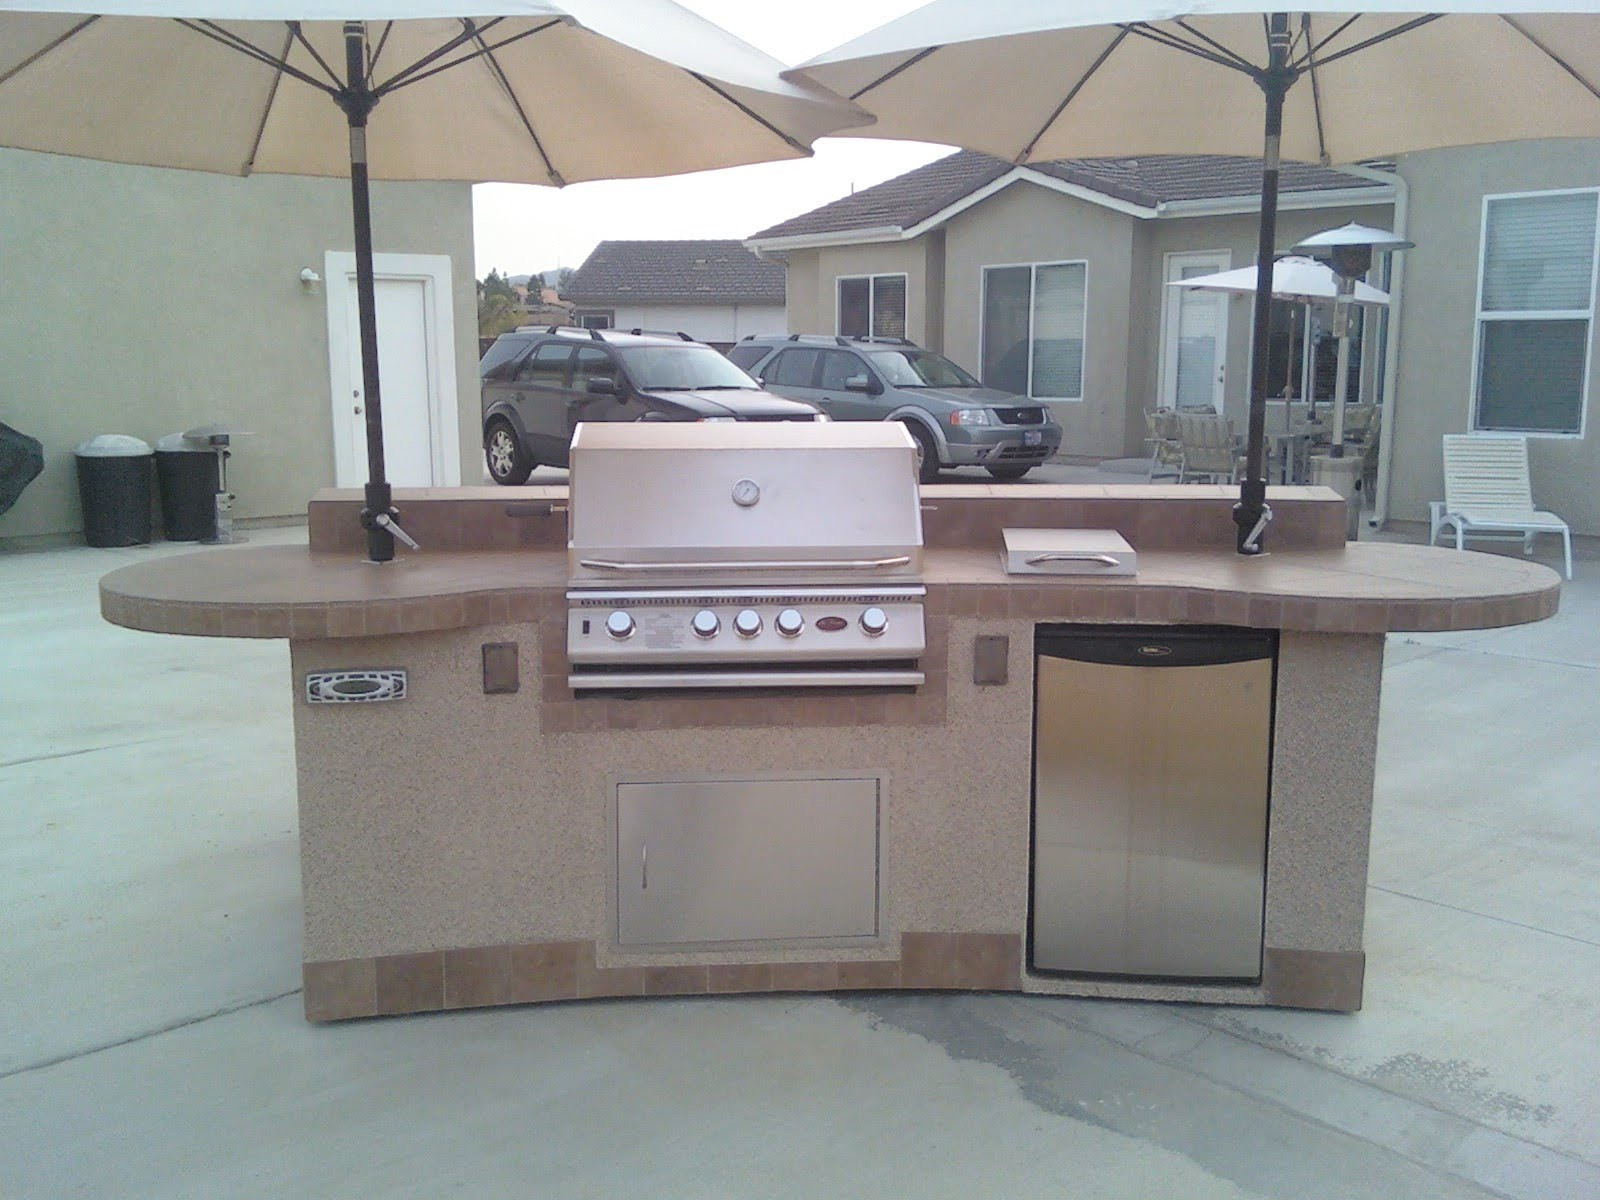 Outdoor Kitchen Tile
 Outdoor Kitchen Construction Tiles tiles and more tiles